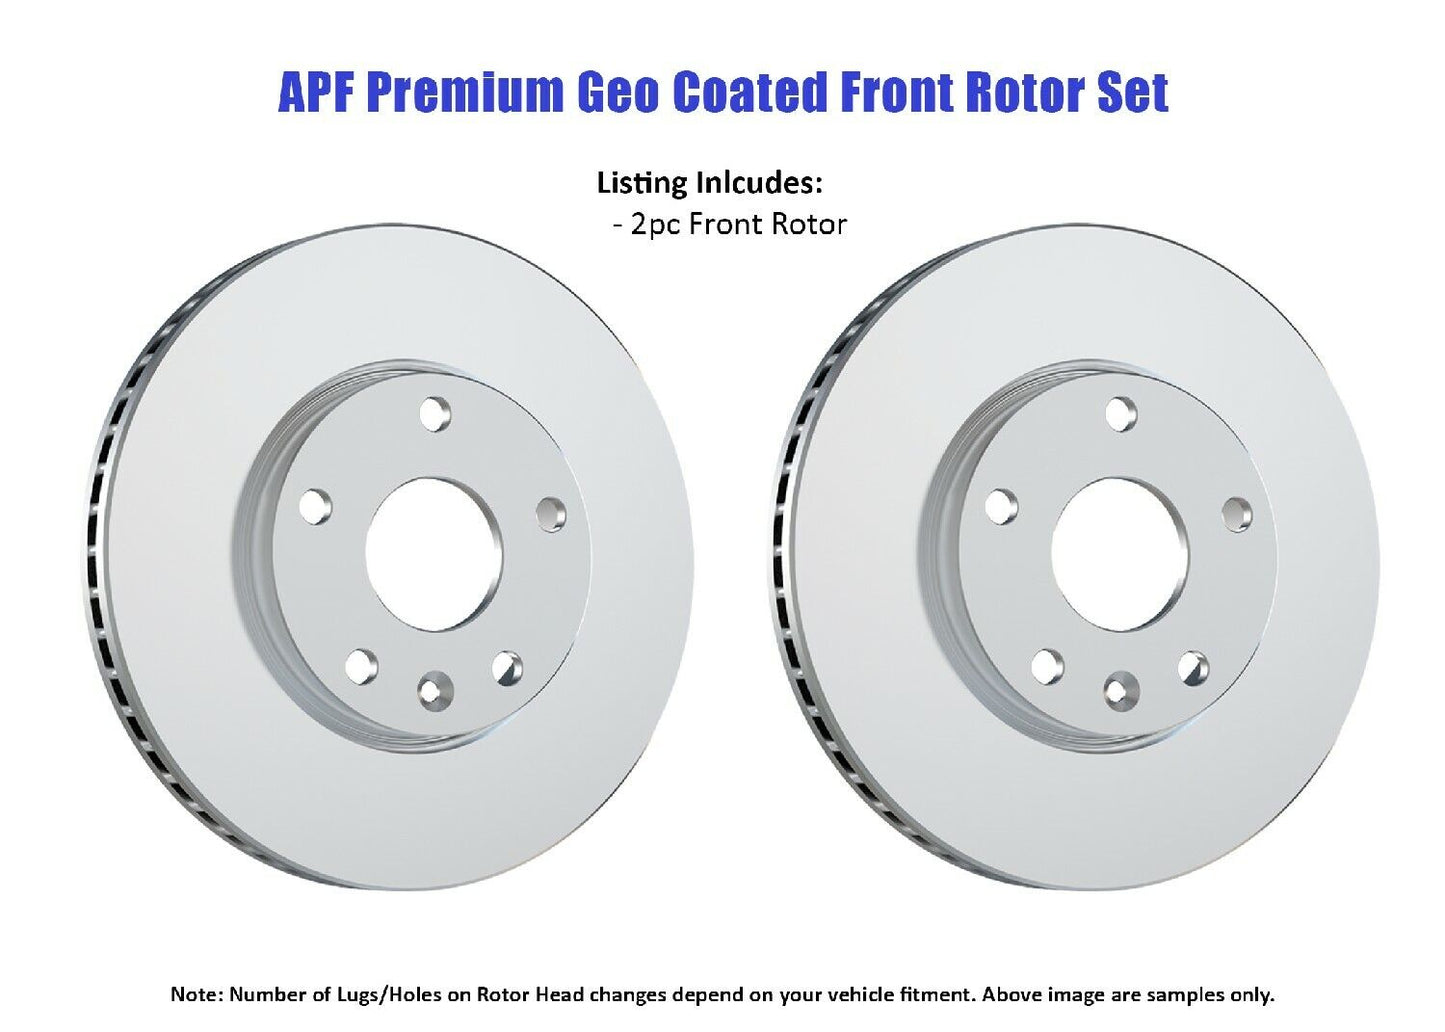 Front Premium Geo Coated Brake Rotor compatible with Chevrolet Monte Carlo 2000-2004 | $100.12